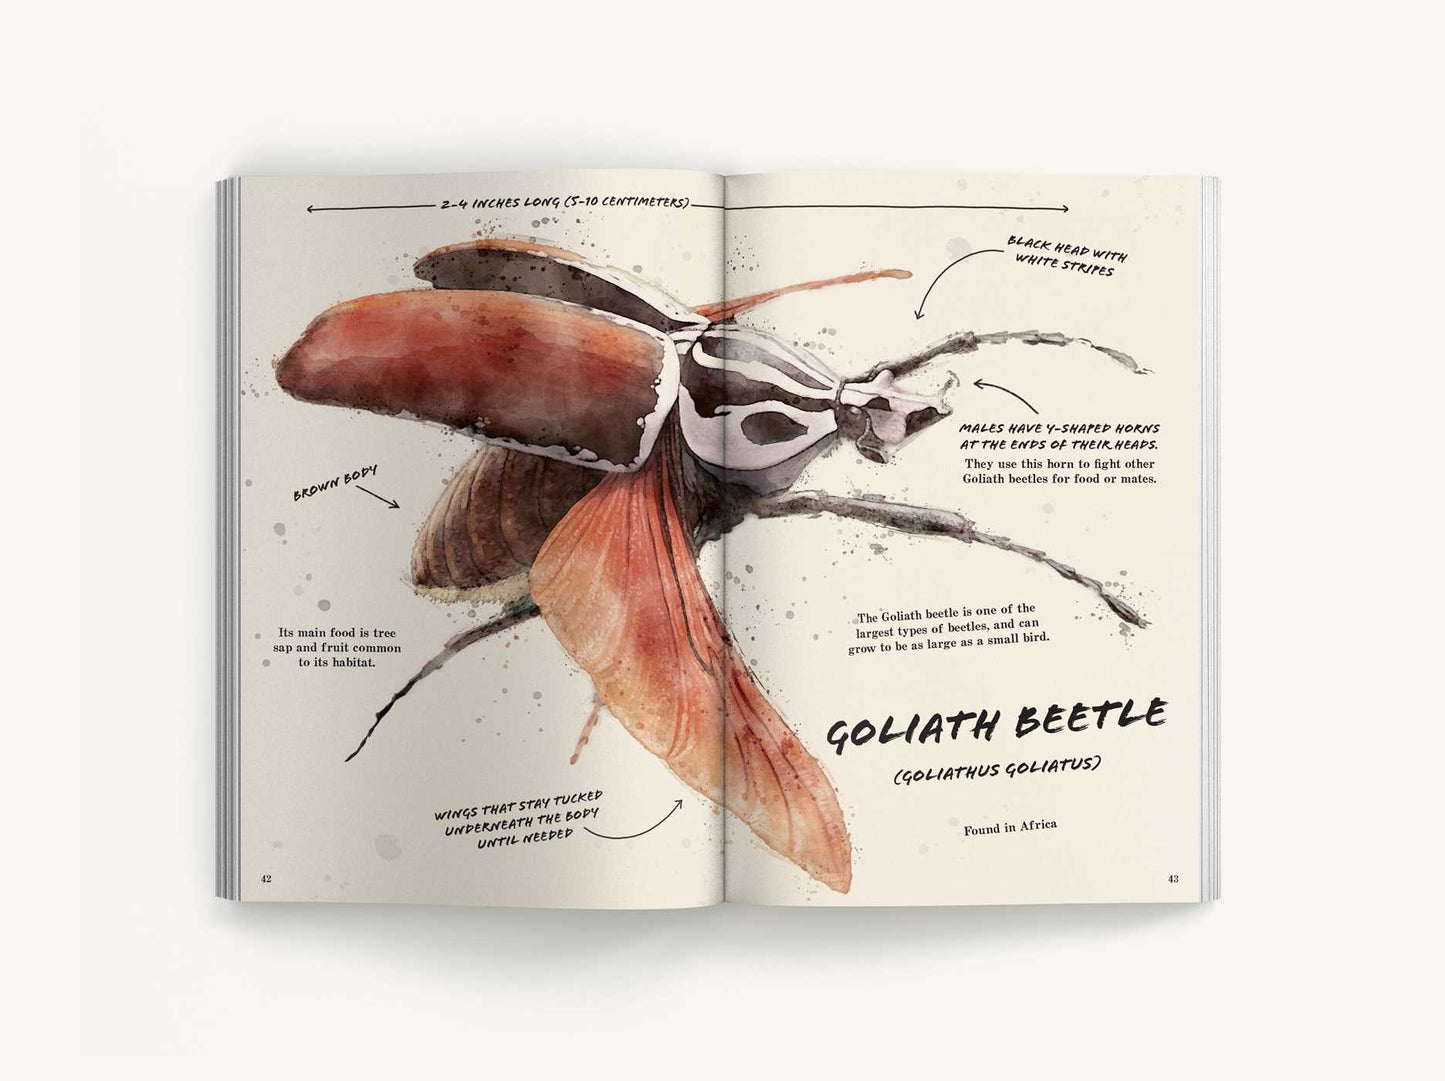 The Ultimate Bug Field Guide: The Entomologist's Handbook